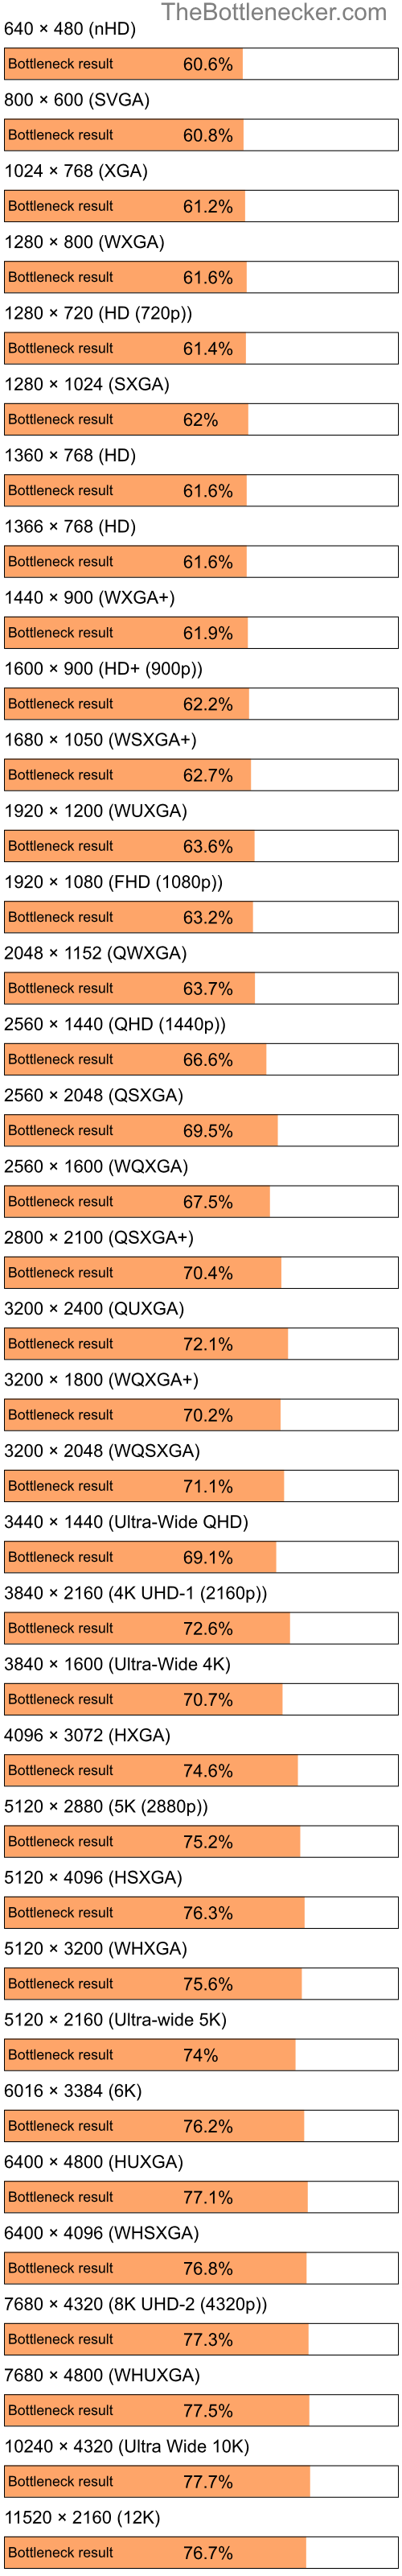 Bottleneck results by resolution for Intel Pentium 4 and AMD Radeon 3100 in Processor Intense Tasks